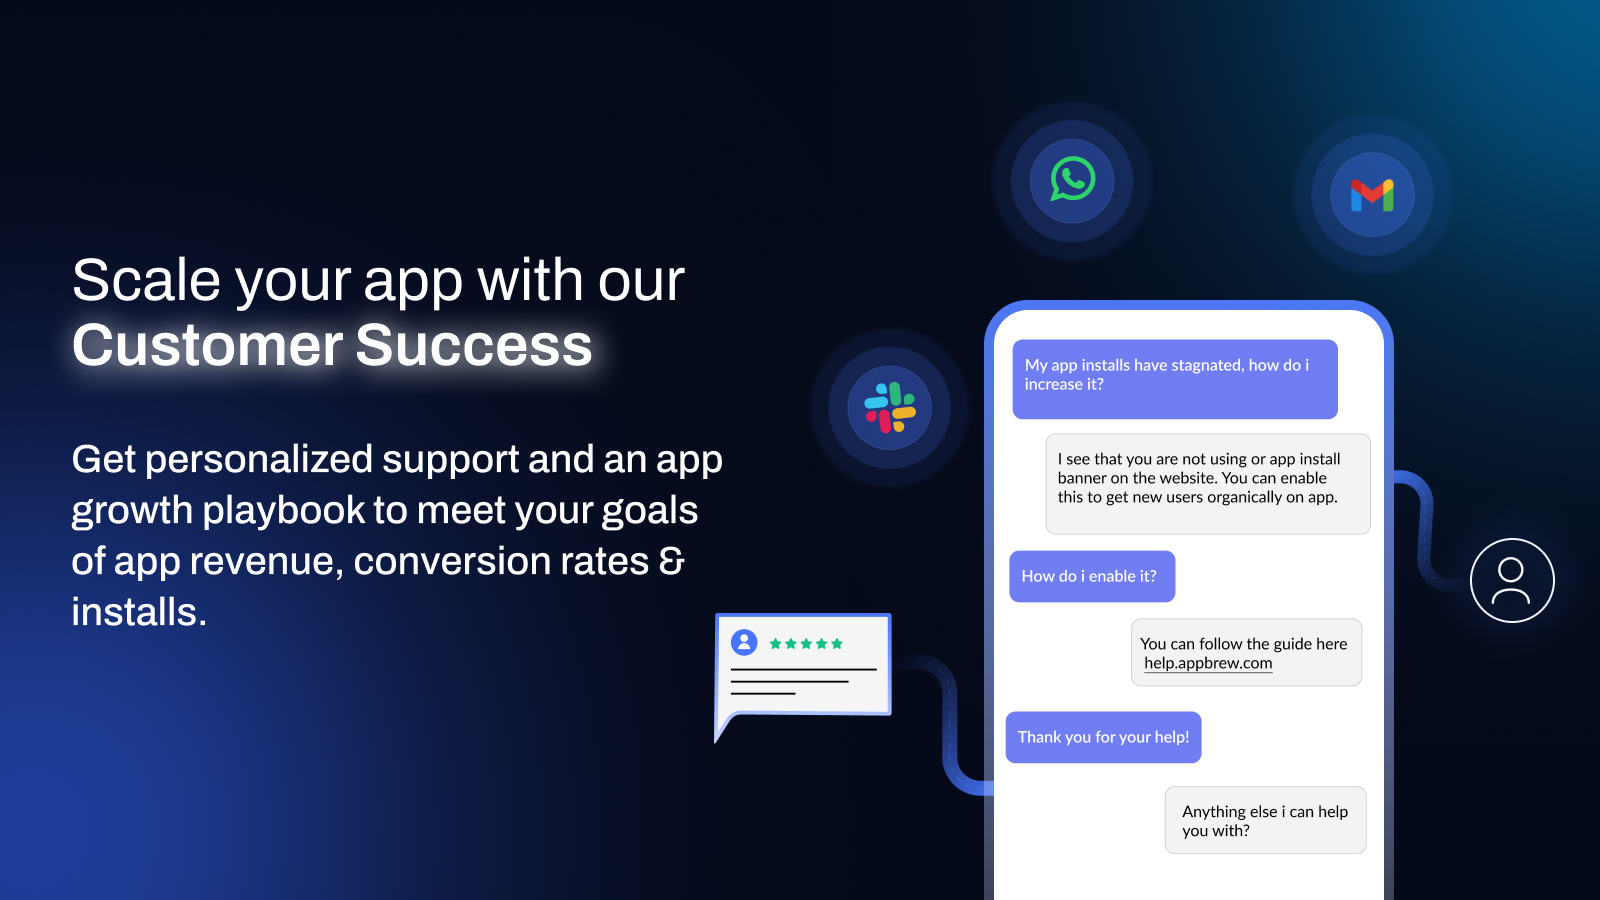 Scale your app with our customer success